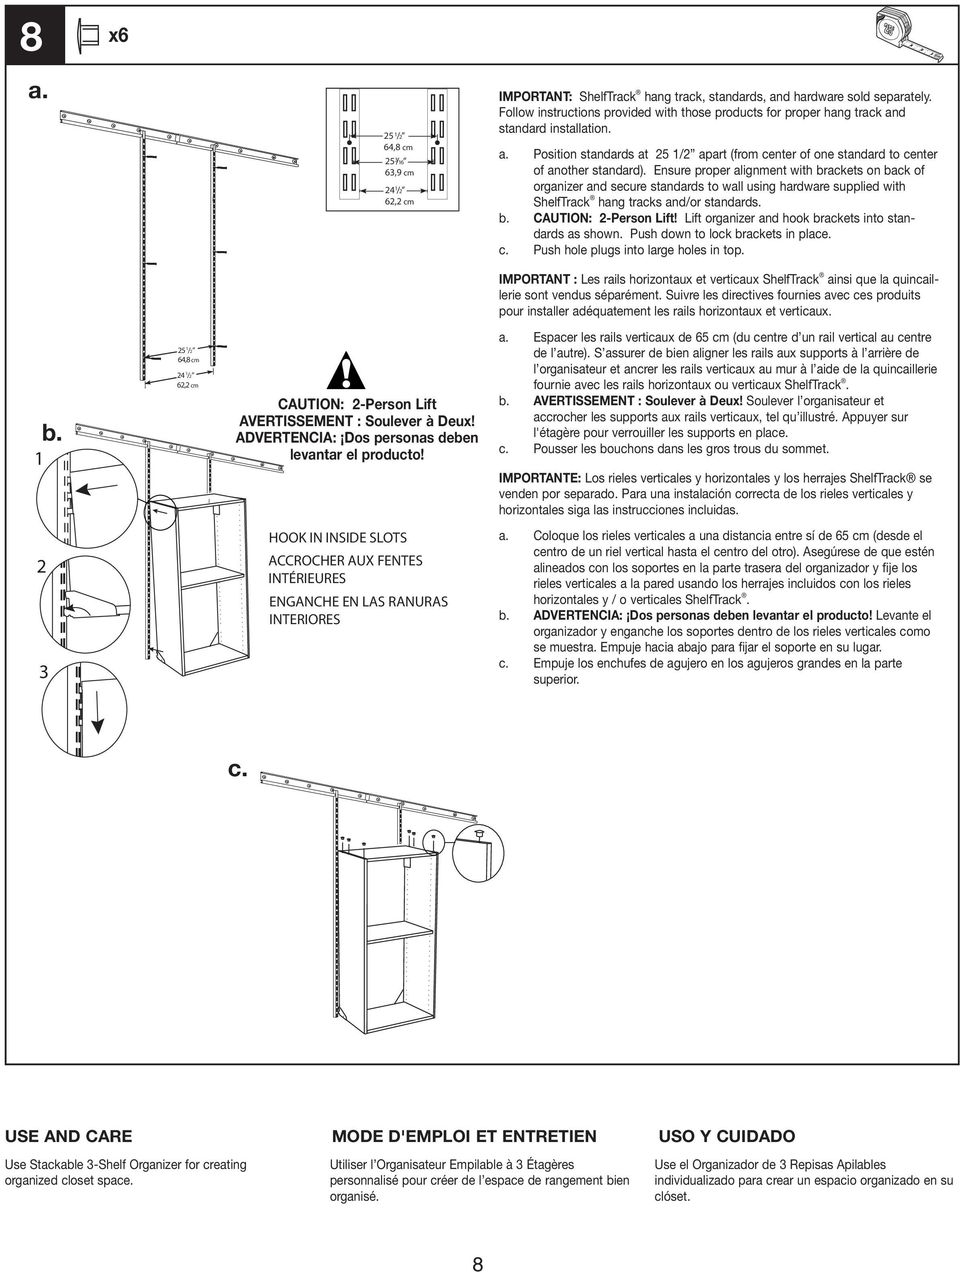 Ensure proper alignment with brackets on back of organizer and secure standards to wall using hardware supplied with ShelfTrack hang tracks and/or standards. CAUTION: -Person Lift!